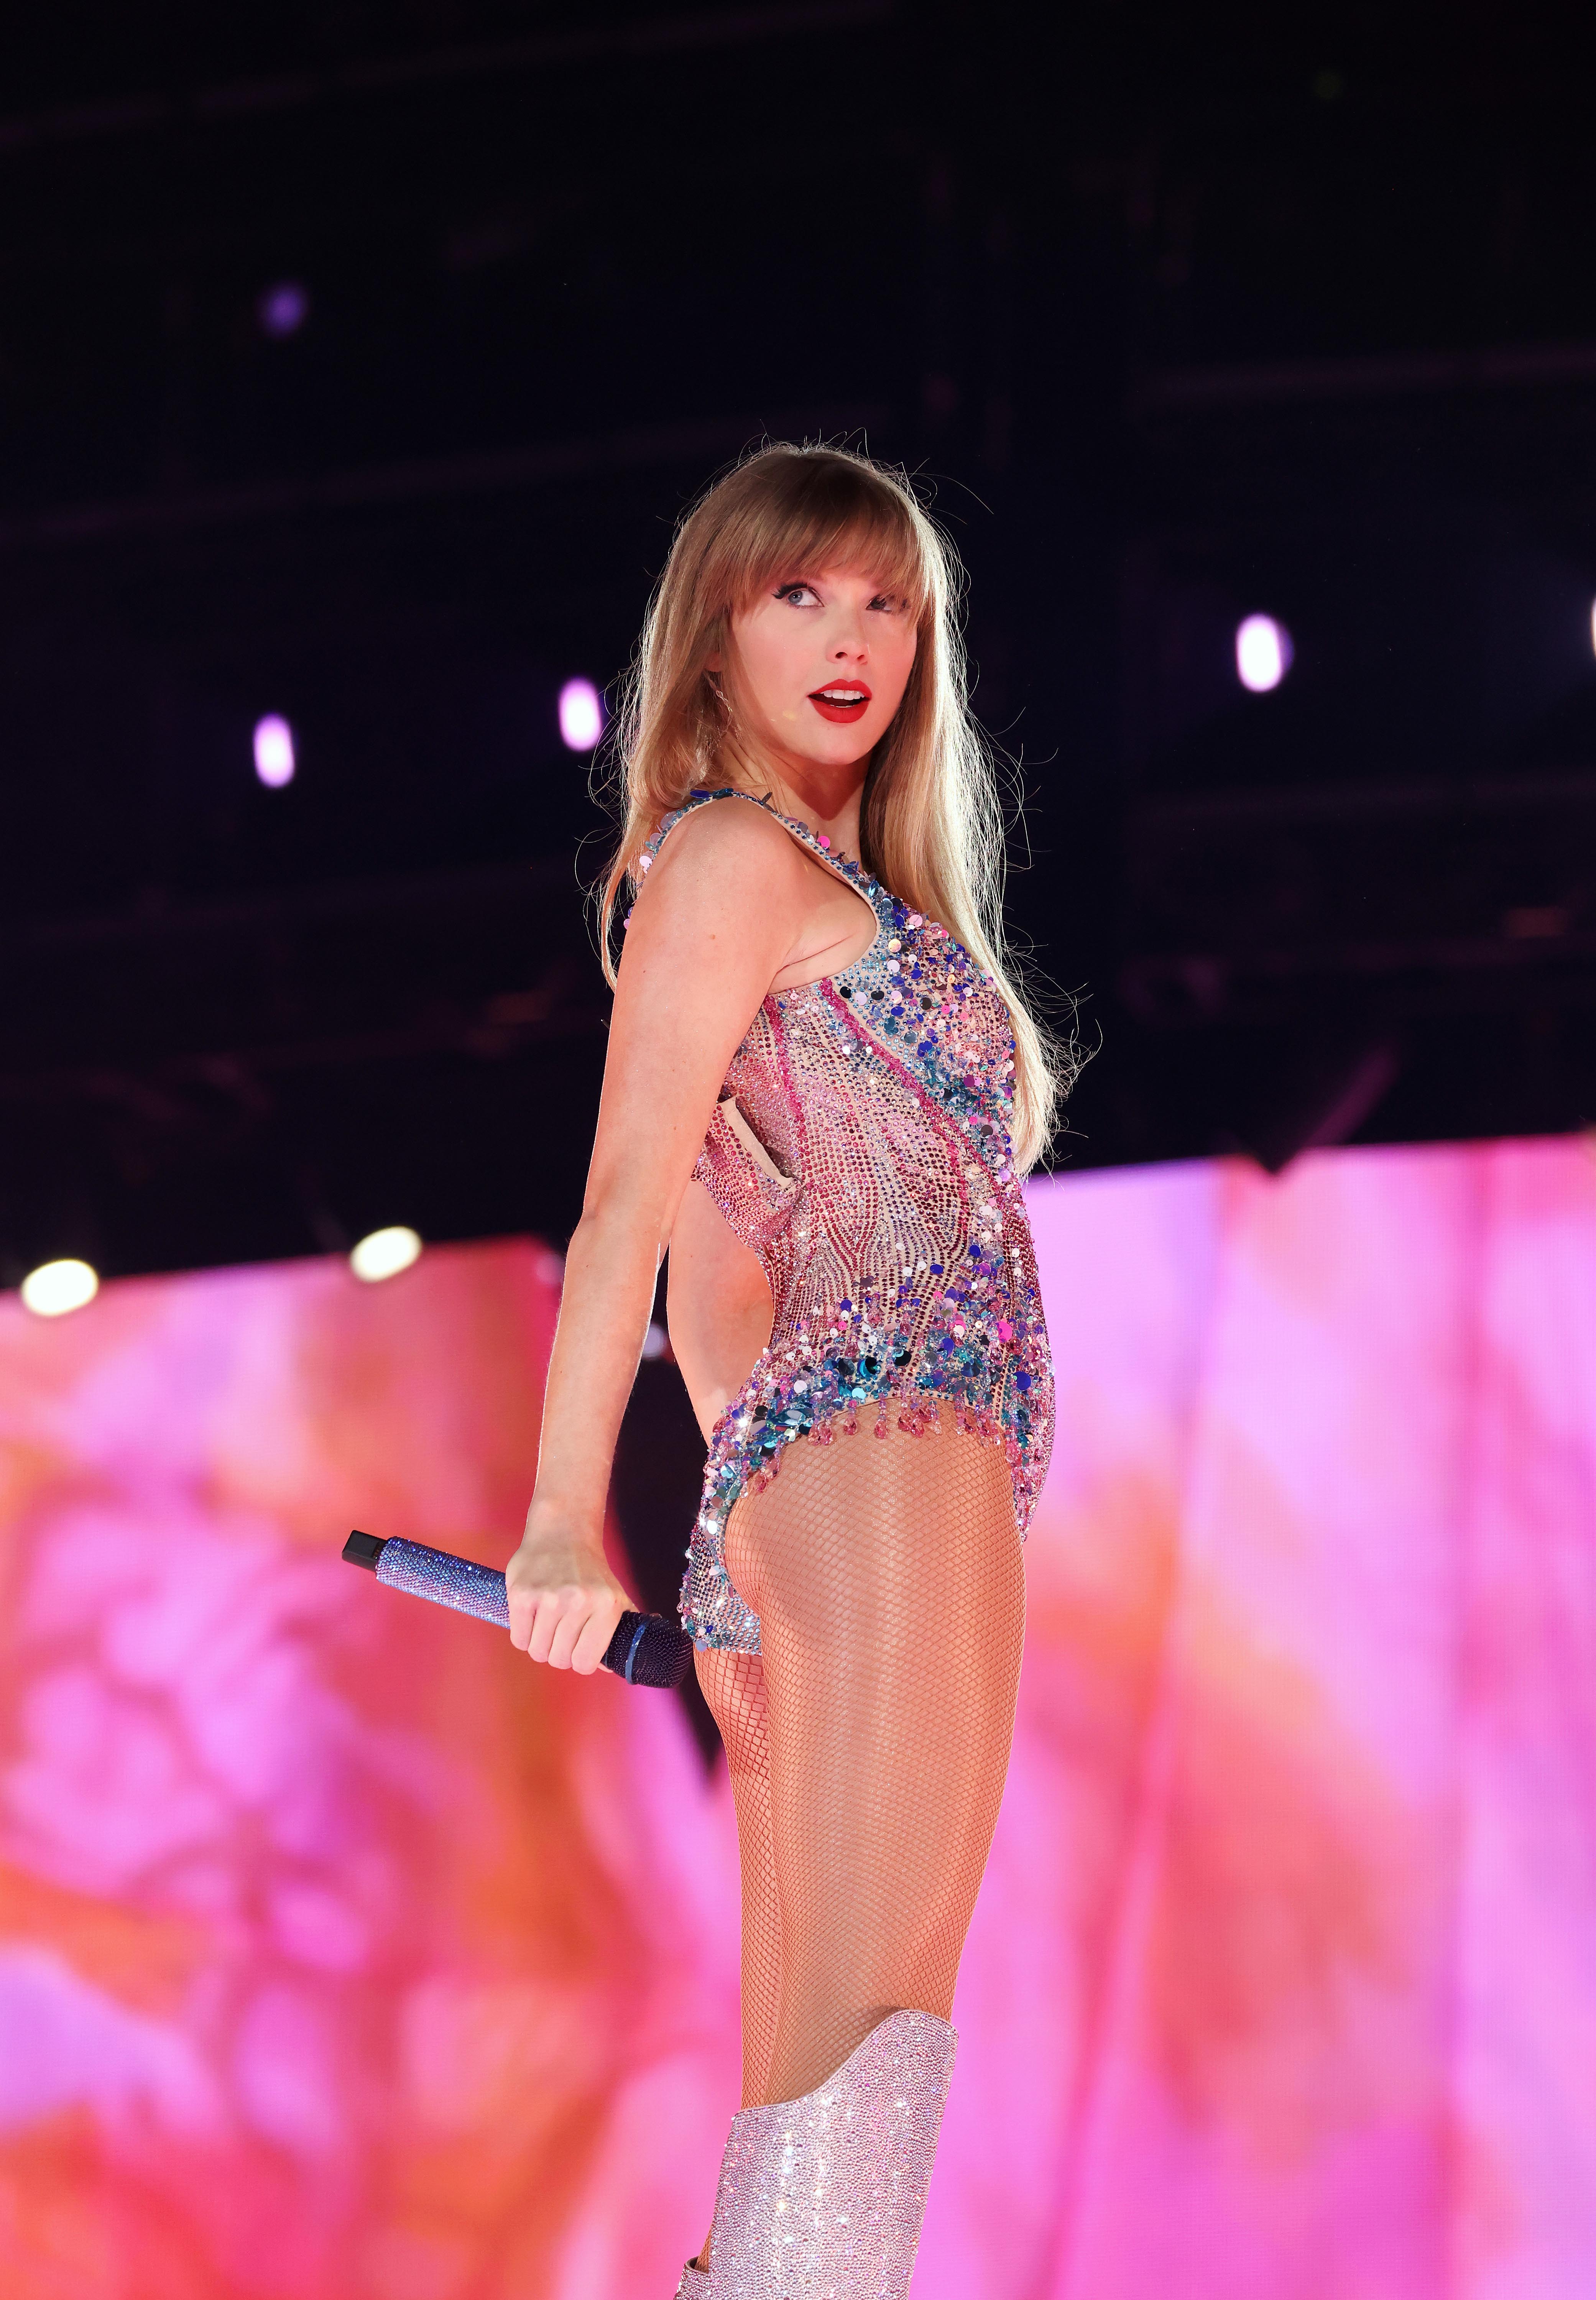 Here's Taylor Swift's Setlist From Opening Night of Eras Tour